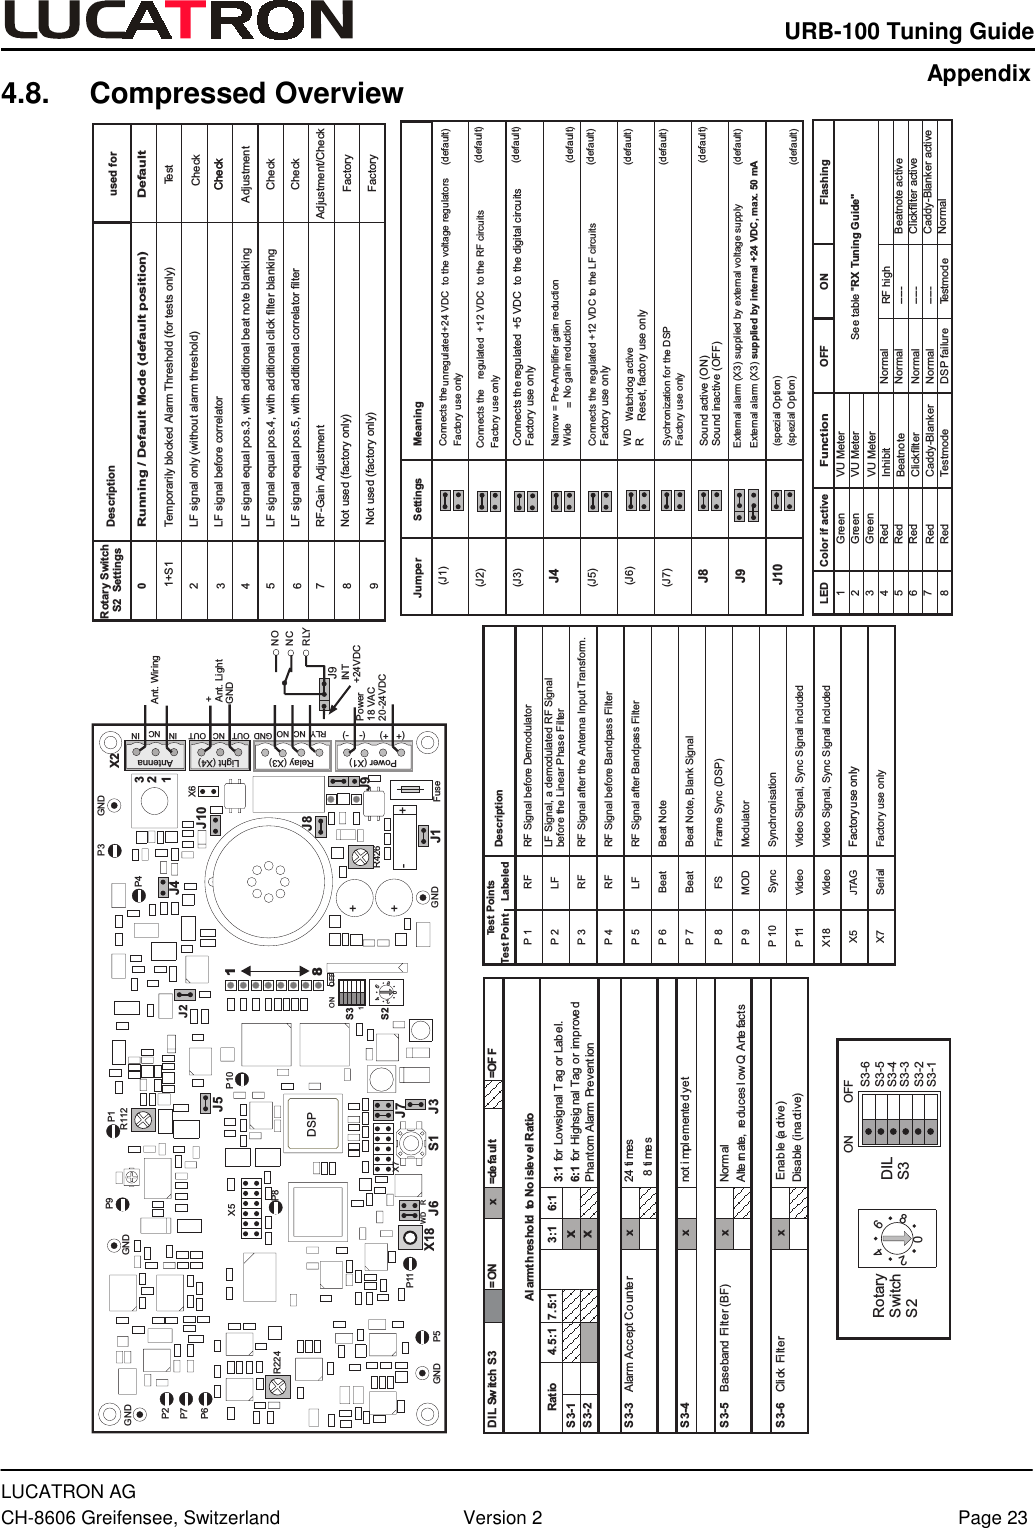    URB-100 Tuning Guide  LUCATRON AG CH-8606 Greifensee, Switzerland  Version 2  Page 23 4.8. Compressed Overview Test PointsTest Point Labeled DescriptionP1P2P3P4P5P6P7P8P9P10P11X18X5RFLFRFRFLFBeatBeatFSMODSyncVideoVideoJTAGRF Signal before DemodulatorLF Signal, a demodulated RF Signalbefore the Linear Phase FilterRF Signal after the Antenna Input Transform.Beat NoteBeat Note, Blank SignalFrame Sync (DSP)ModulatorSynchronisationFactoryuse onlyRF Signal before Bandpass FilterRF Signal after Bandpass FilterVideo Signal, Sync Signal includedVideo Signal, Sync Signal includedX7 Serial Factory use only12345678LEDGreenGreenGreenRedRedRedRedRedColor if activeFunctionOFF ON FlashingVU MeterVU MeterVU MeterInhibitBeatnoteClickfilterCaddy-BlankerTestmodeRF high---------------TestmodeNormalNormalNormalNormalDSP failureBeatnote activeClickfilter activeCaddy-Blanker activeNormalSee table &quot;RX Tuning Guide&quot;04628RotarySwitchS2DILS3ON OFFS3-6S3-5S3-4S3-3S3-2S3-1DILSwitchS3 =ON x =de fa ult =OF F4.5:1 7. 5:1 3:1 6:1S3-1xS3-2xS3-3 Alarm Accept Co unte r x24 ti mes8timesS3-4 xS3-5 xS3-6 xDisable (ina ctive)Alte rn ate, re duces l ow Q Arte fact sNormalnot i mpl emente d yetBaseband Fi lt er (BF)Click FilterAl armth resho ld to No i slev el Ratio3:1 for Lowsignal T ag or Lab el.6:1 for Highsig nal Tag or improve dPhantom Alarm Prevent ionRatioEnab le (a ct ive)Jumper Settings Meaning(J1)Narrow = Pre-Amplifier gain reductionWide=No gain reduction(J2)(J3)J4(J5)(J6)(J7)J8J9Connects the +24 VDC to the voltage regulatorsFactory use onlyunregulatedConnects the +12 VDC to the RF circuitsFactory use onlyregulatedConnects the +5 VDC to the digital circuitsFactory use onlyregulatedConnects the regulated +12 VDC to the LF circuitsFactory use onlyWD Watchdog activeReset, factory use onlySychronization for the DSPFactory use only(spezial Option)External alarm (X3) supplied by external voltage supplyExternal alarm (X3) supplied by internal +24 VDC, max. 50 mASound active (ON)Sound inactive (OFF)J10(default)(default)(default)(default)(default)(default)(default)(default)(default)(default)R(spezial Option)Rotary SwitchS2 Settings1+S12345678Running / Default Mode (default position)LF signal equal pos.3, with additional beat note blankingNot used (factory only)Temporarily blocked Alarm Threshold (for tests only)RF-Gain AdjustmentDefaultCheckCheckFactoryTestFactoryNot used (factory only)LF signal only (without alarm threshold)LF signal before correlatorLF signal equal pos.4, with additional click filter blankingLF signal equal pos.5, with additional correlator filter90Adjustment/CheckAdjustmentCheckCheckCheckDescription used forRLY++-+GNDP3P4GNDGNDGNDGNDP1P9P2P7P6R224P5P11R112P10P8S3S2ON OFFX18R426DSPJ10J4J9J8J1J3J2J5J7IN NC INOUT NC OUTPower (X1) Relay (X3) Light (X4) AntennaX6FuseS1X7X5(+ +) (- -)J6WD RX2321046281RLY NC NO GNDNONCPower18 VAC20-24VDCAnt. LightAnt. Wiring+GNDINT+24VDCJ918 Appendix 